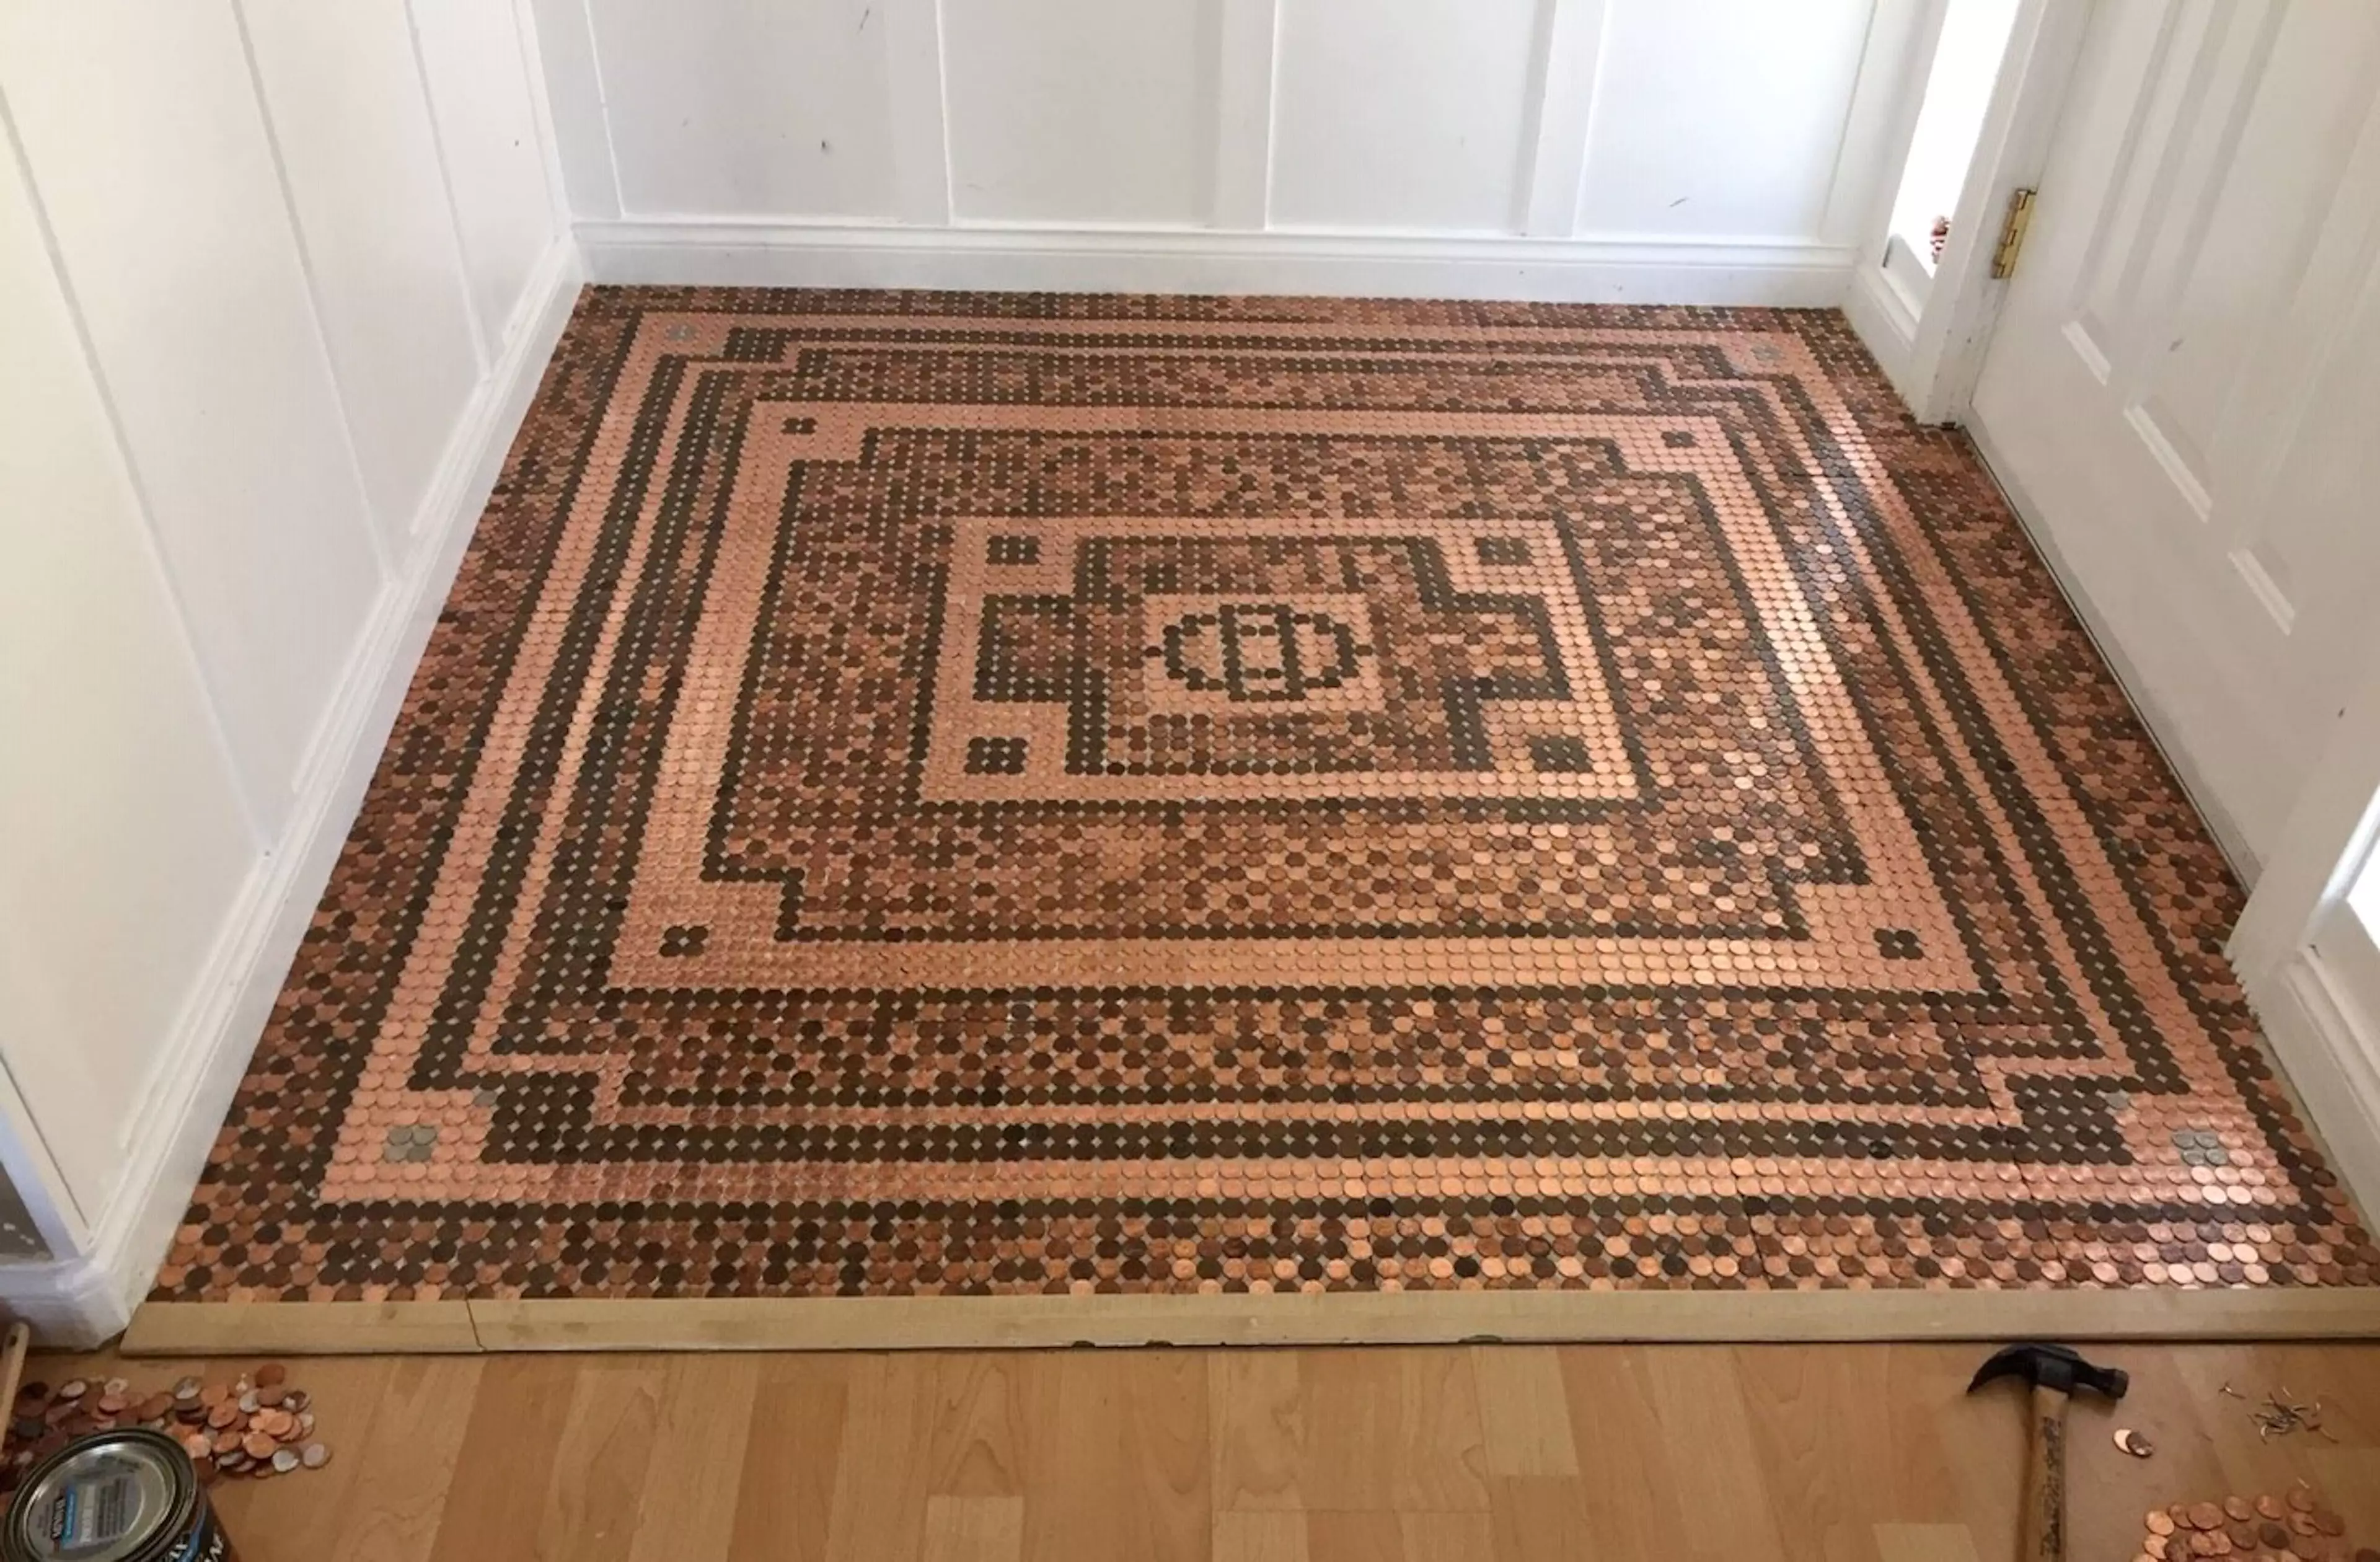 One woman made an incredible floor from just coins (